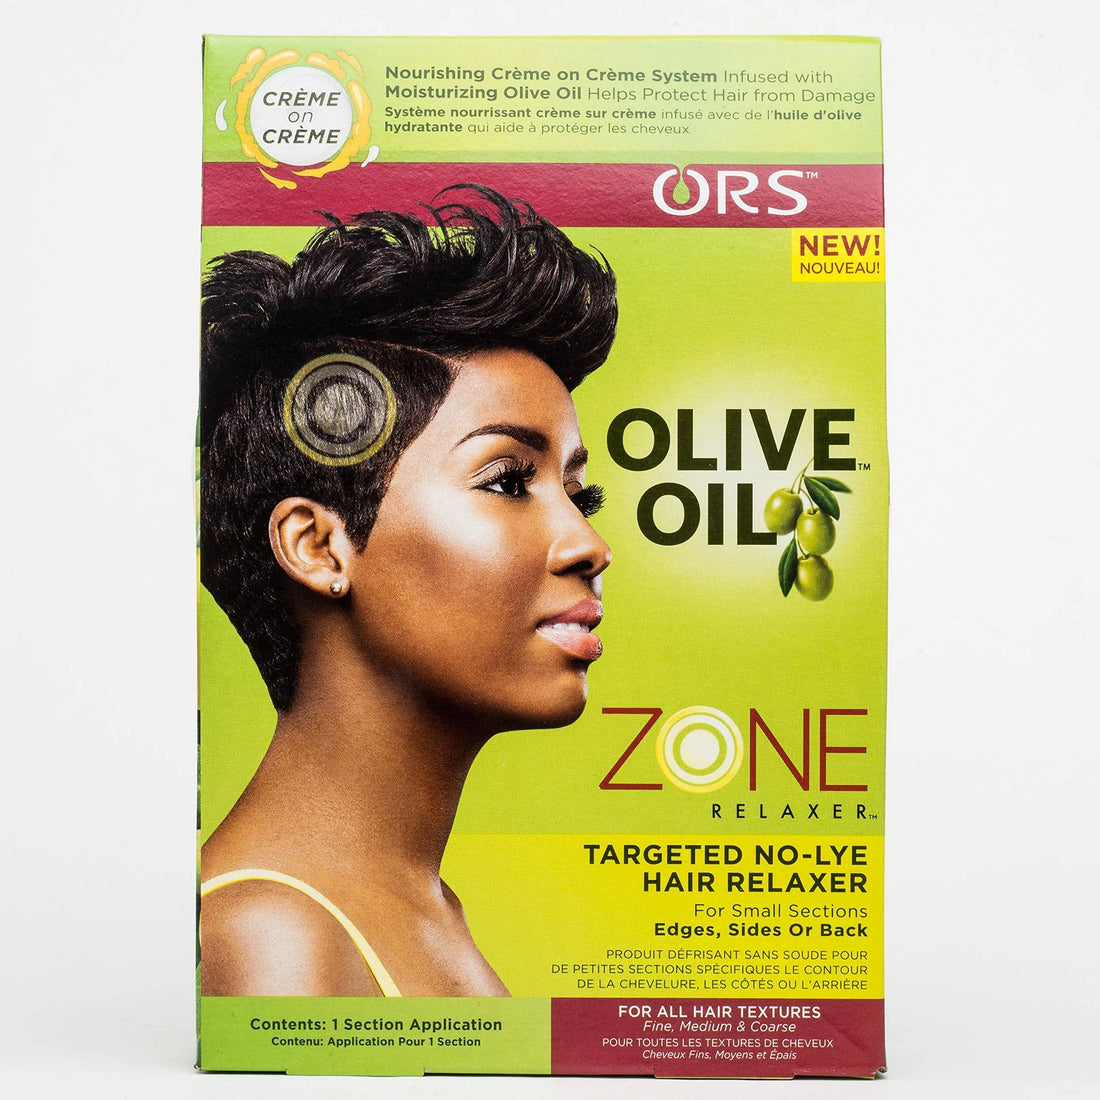 ORS OLIVE OIL ZONE TARGETED NO-LYE HAIR RELAXER KIT